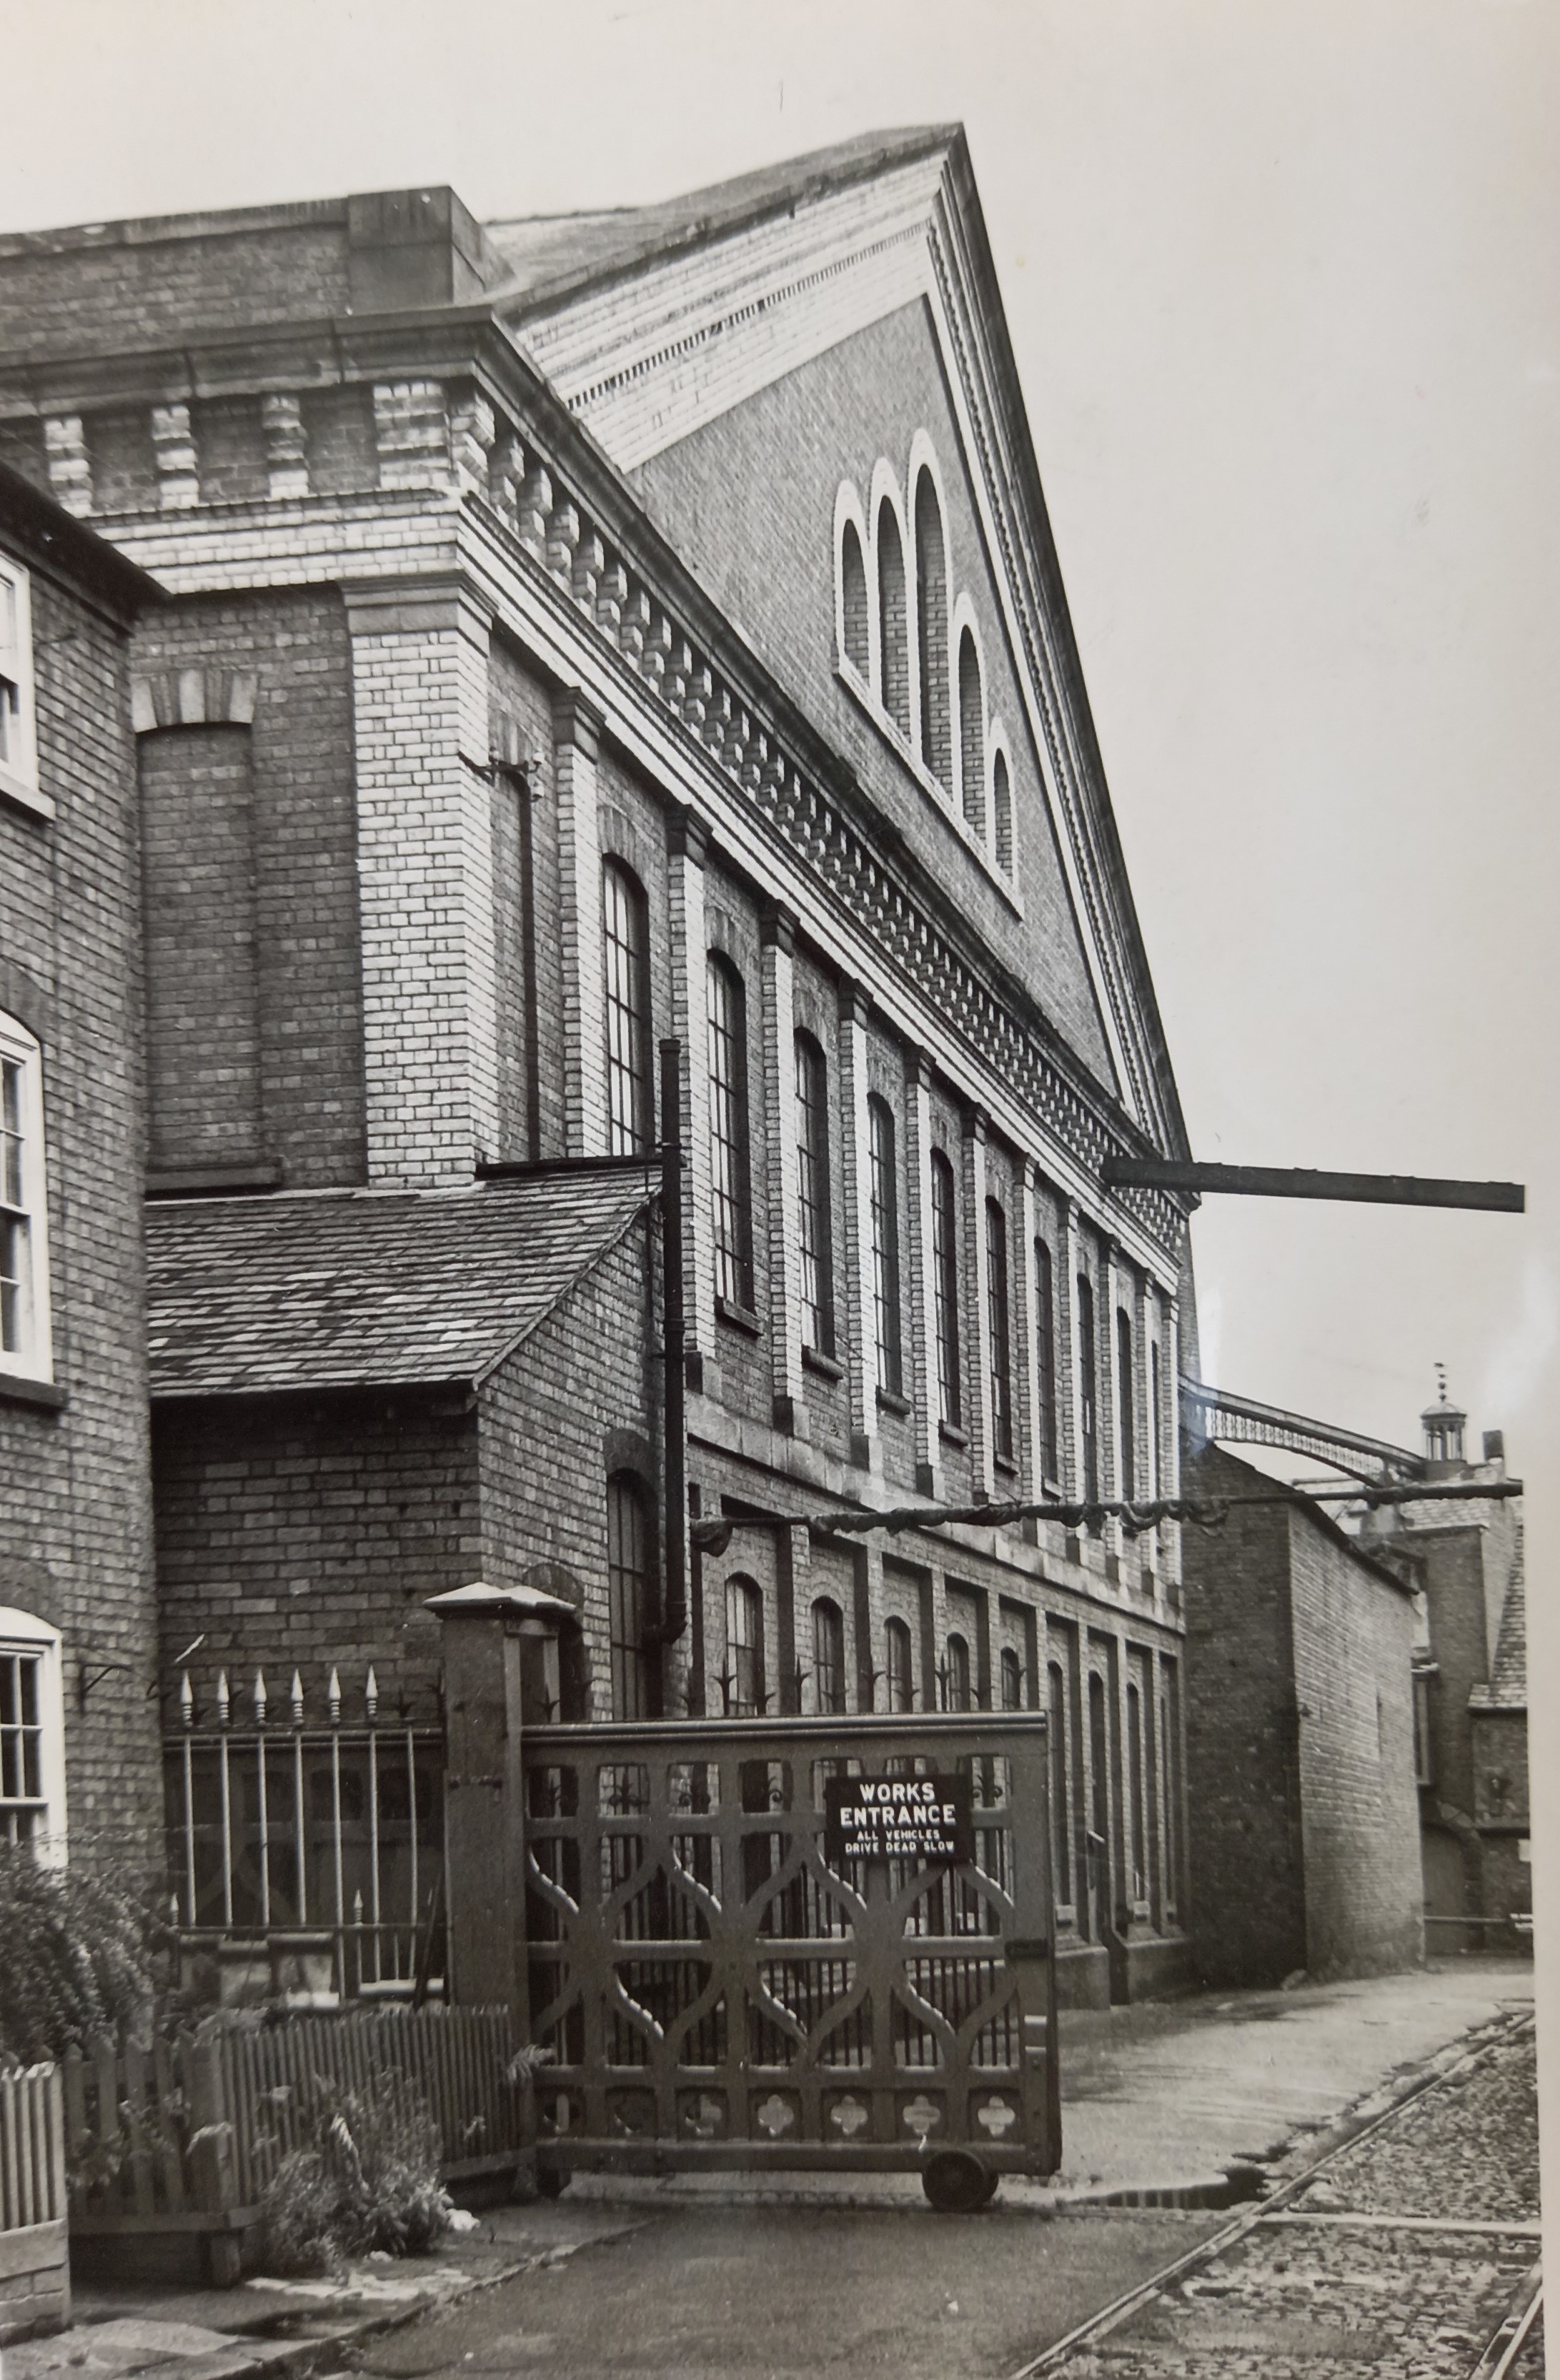 The works entrance with the Vinegar Express railway line clearly evident. The Hill Evans factory site is now the St Martin’s Quarter development